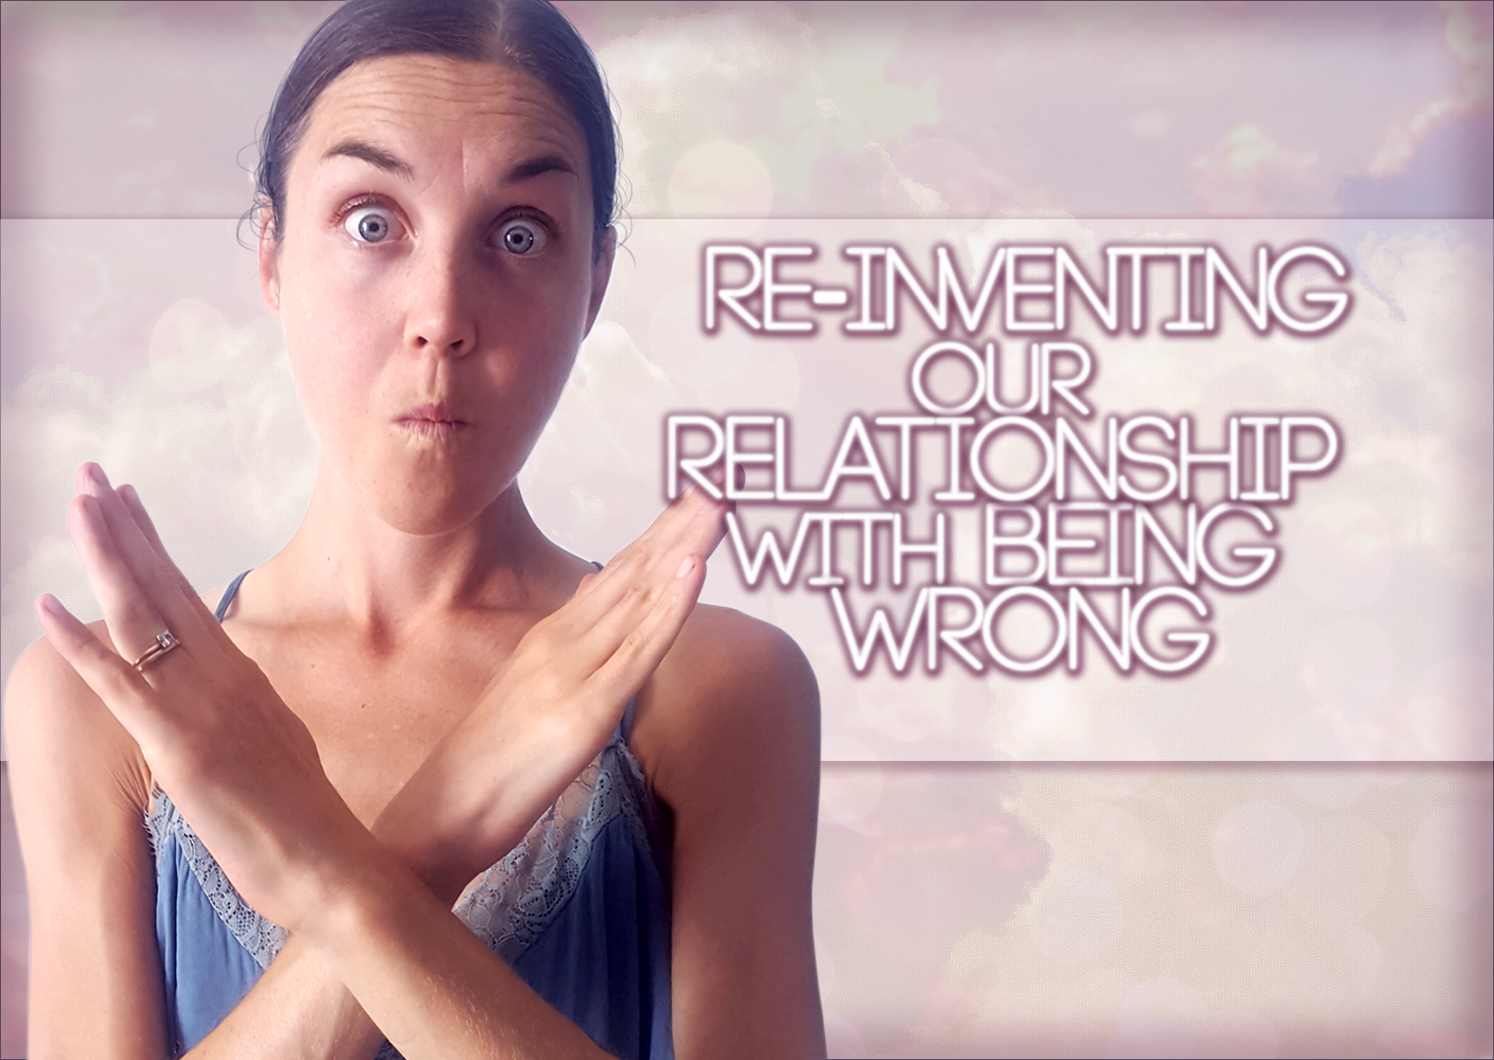 Re-Inventing Our Relationship With Being Wrong